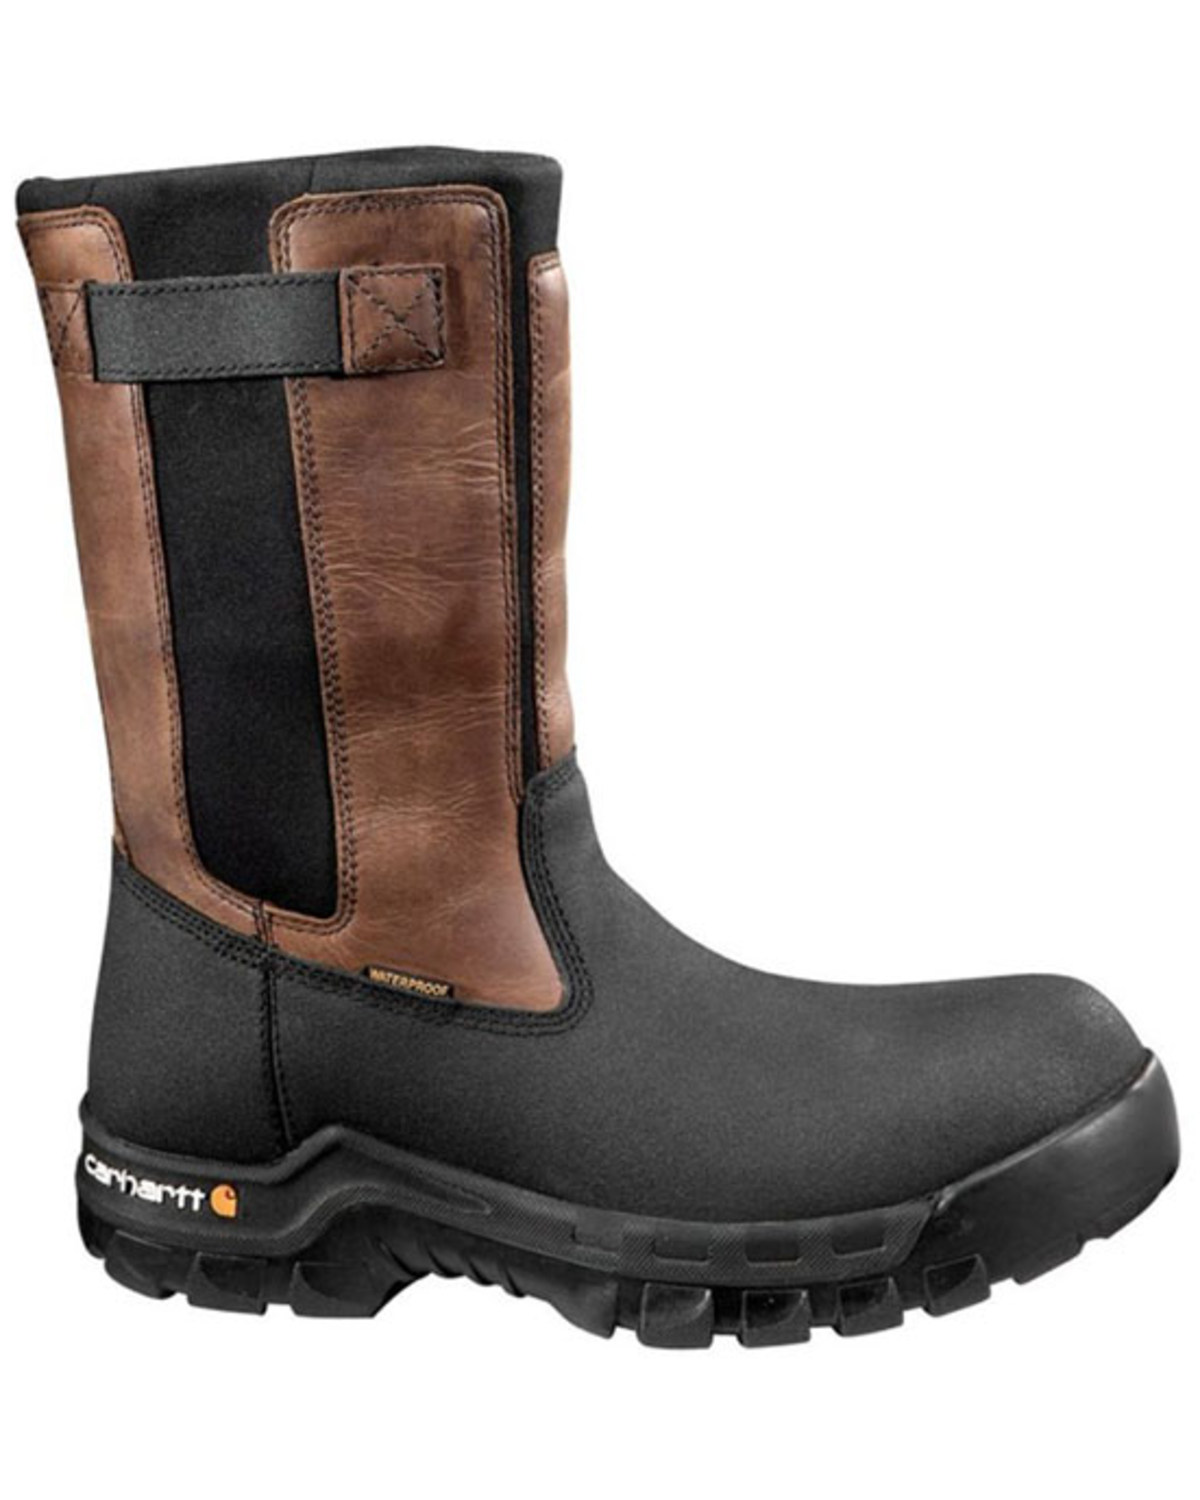 composite toe muck boots